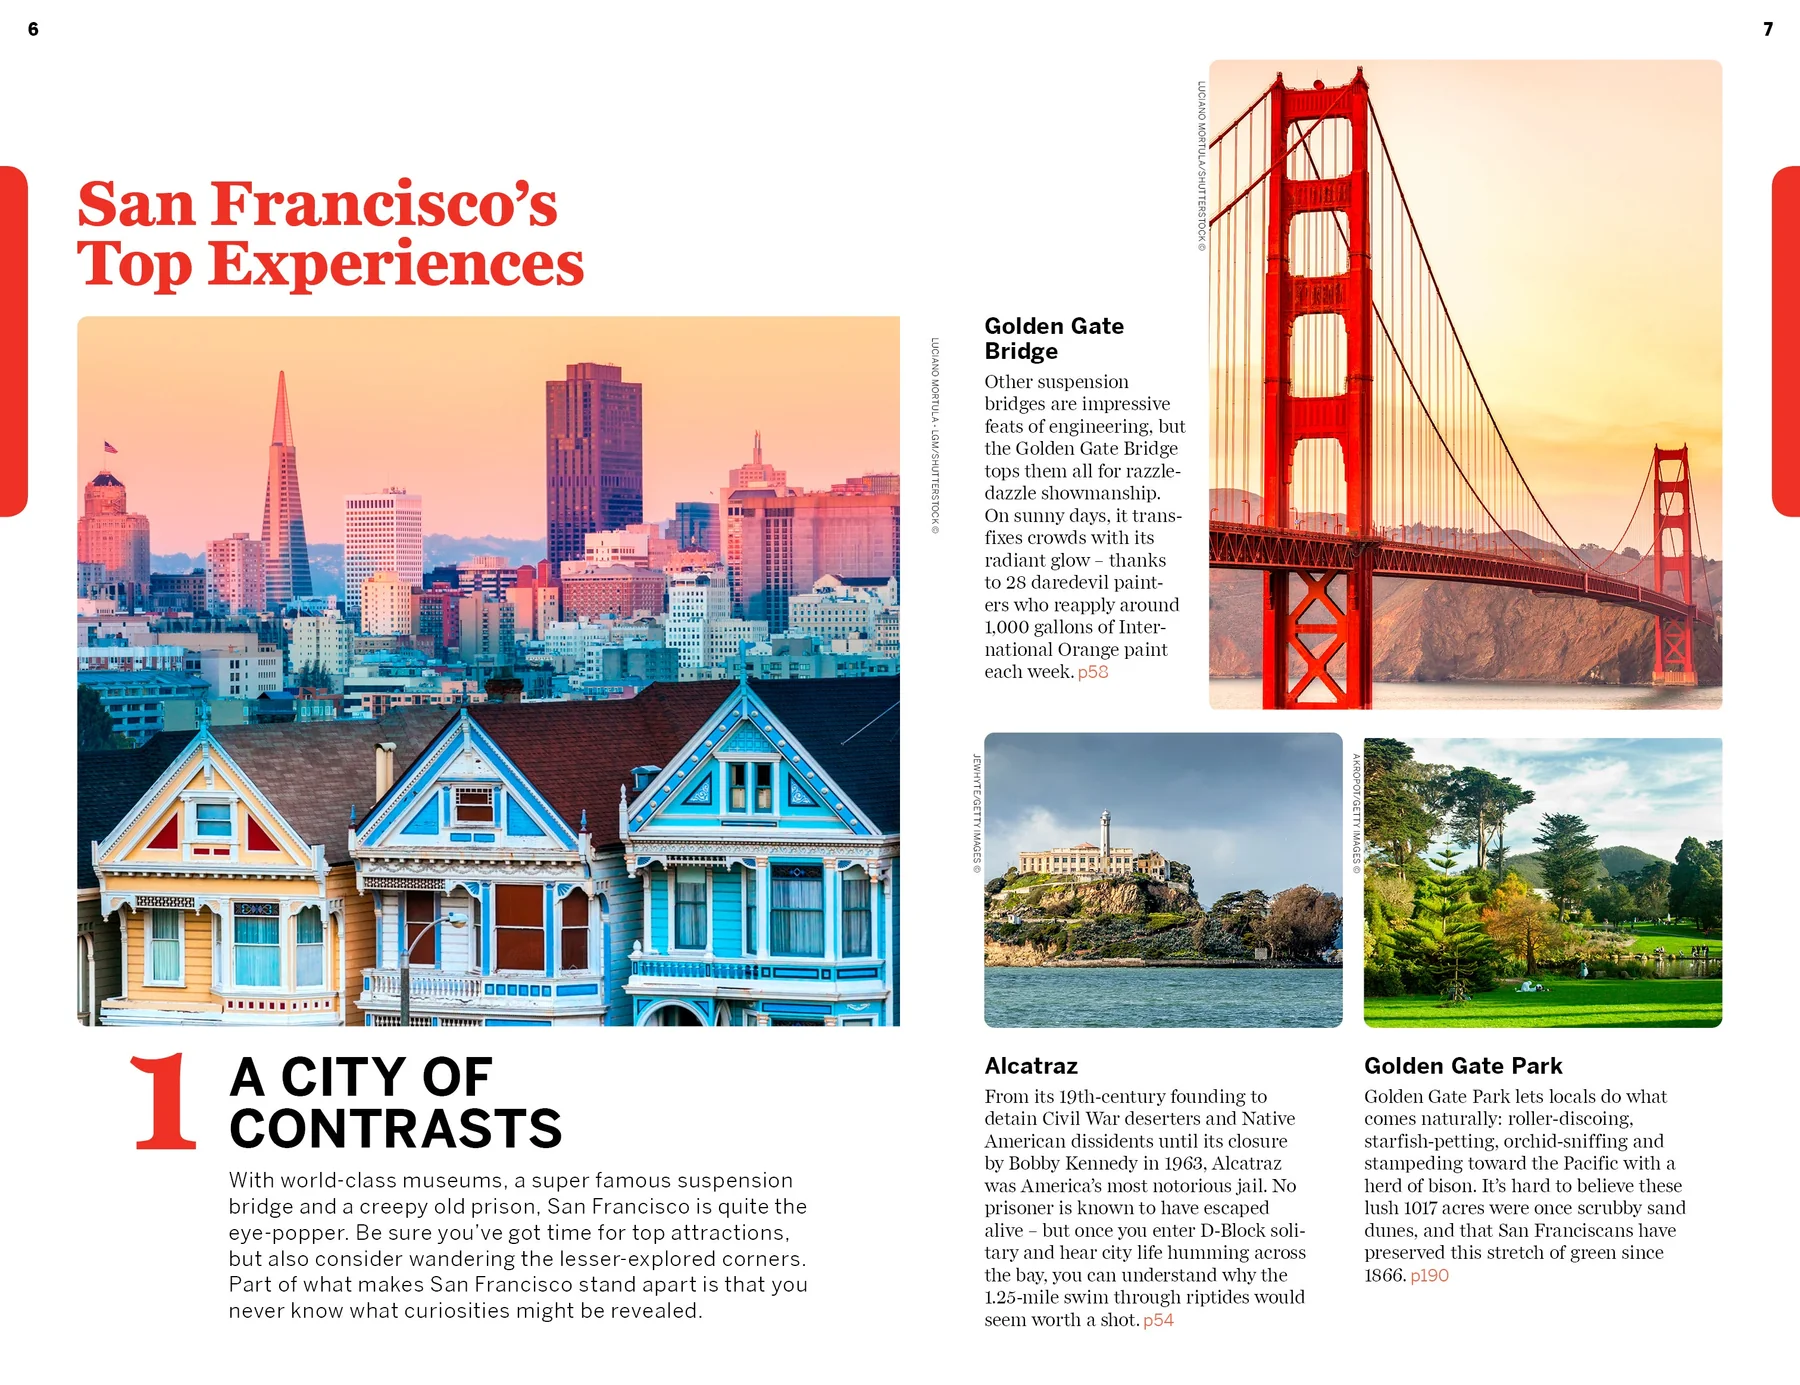 San Francisco Lonely Planet